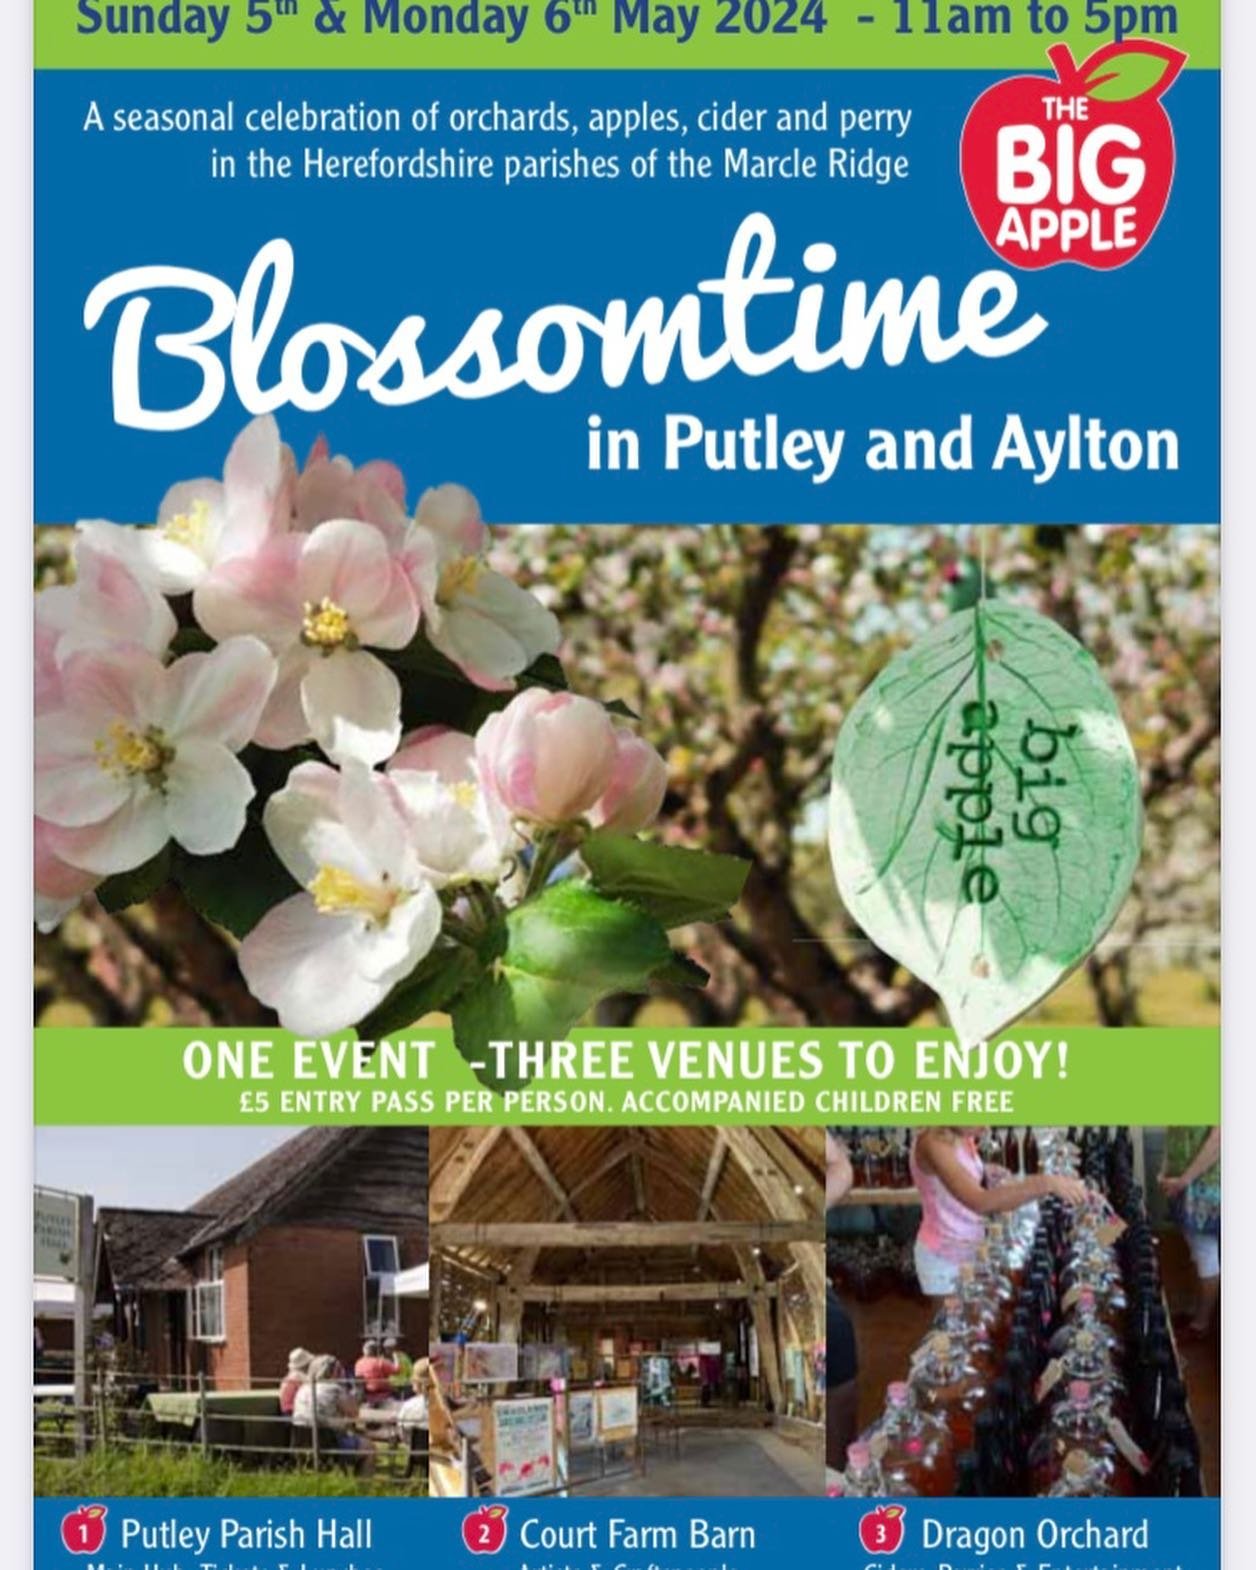 Blossomtime in Putley on Sunday 5th &amp; Monday 6th May. Come and savour cider and find out about apple culture in Herefordshire. I&rsquo;ll be talking about seasonal tonic herbs and also showing people how to make traditional Japanese woodblock pri